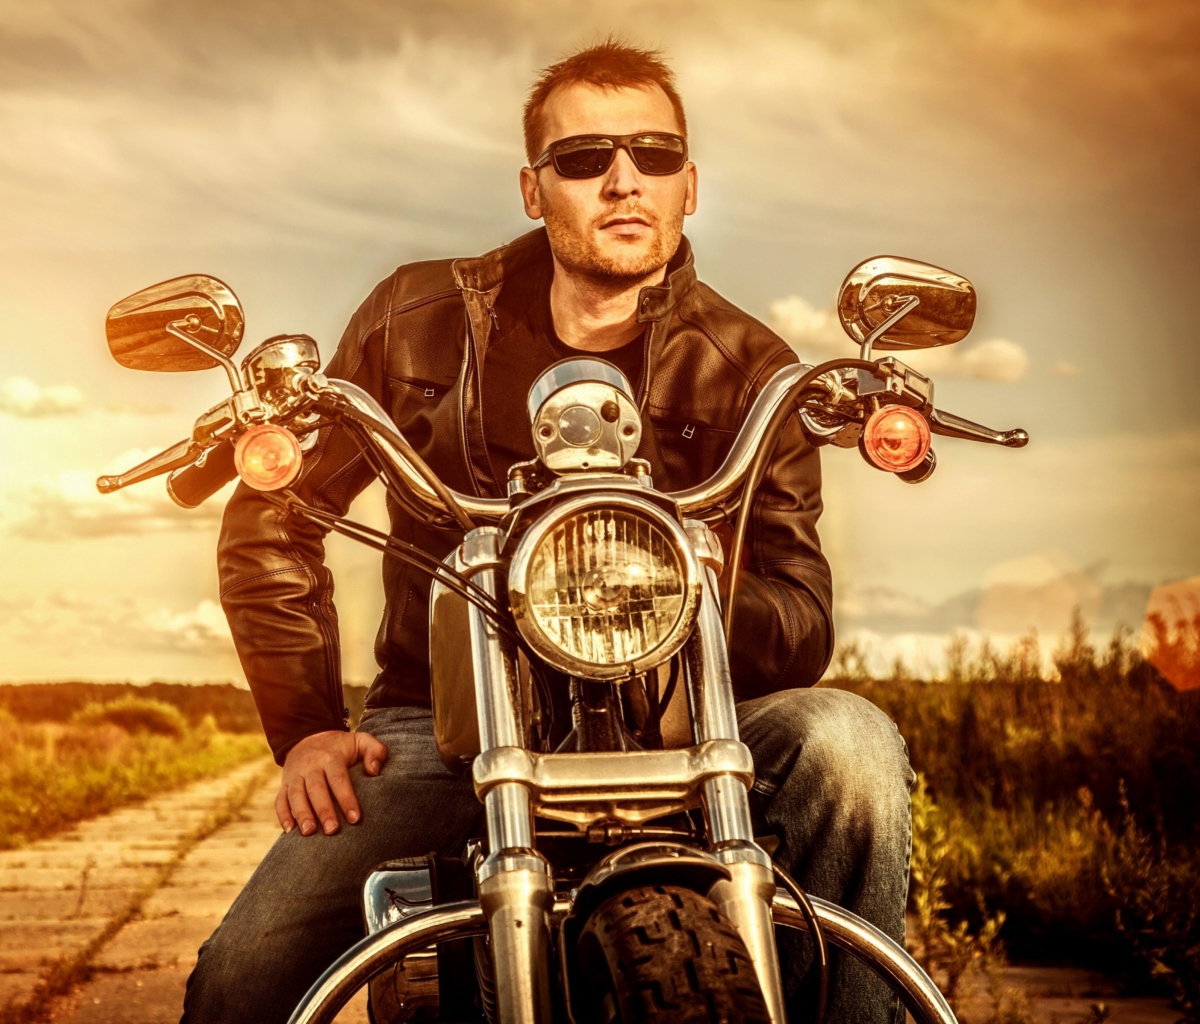 Motorcycle Driver wallpaper 1200x1024